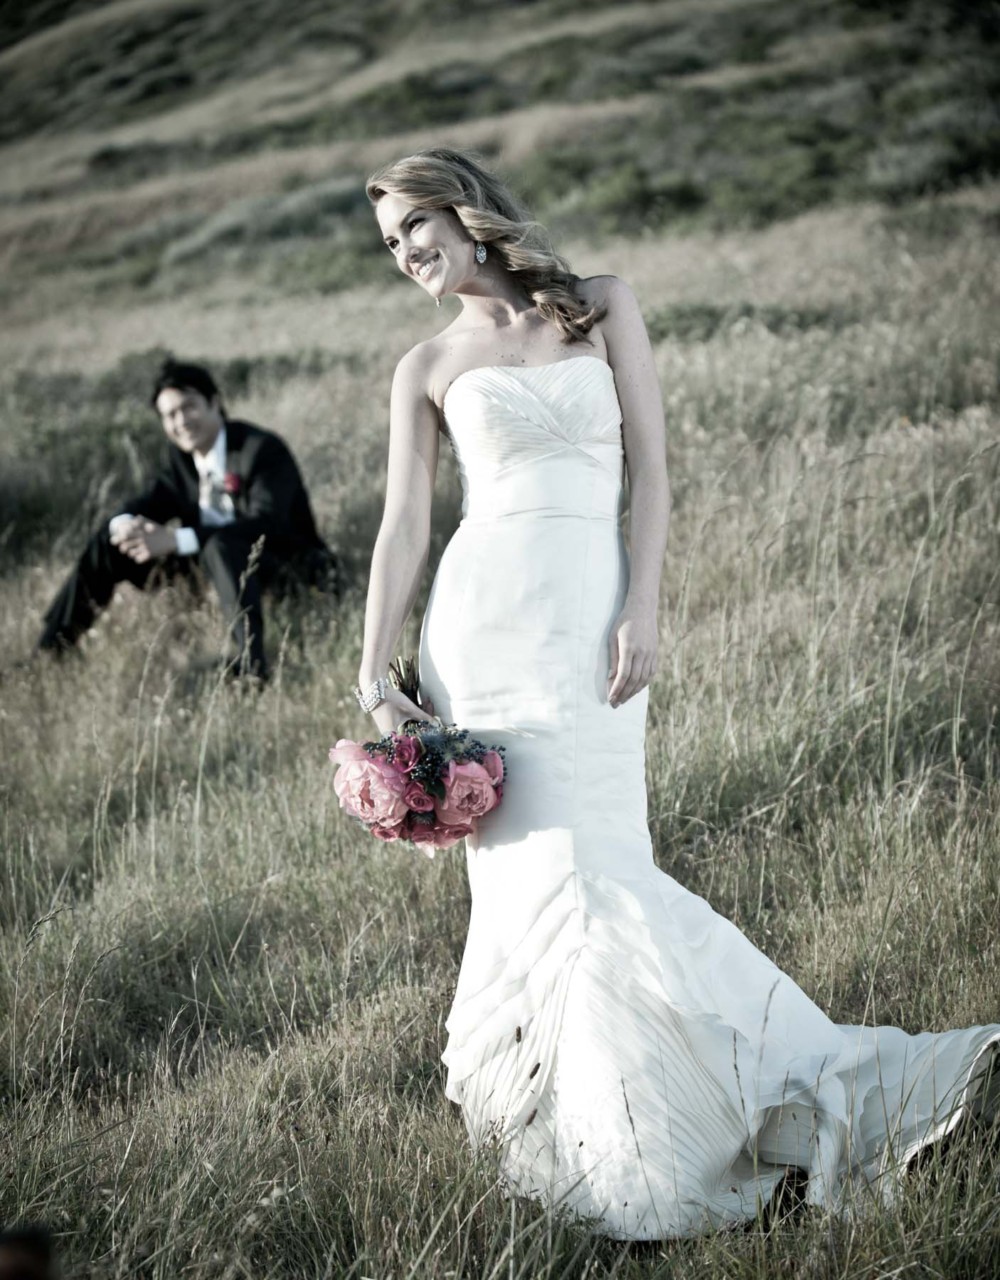 Looking for a spring wedding photographer in Eagle River?